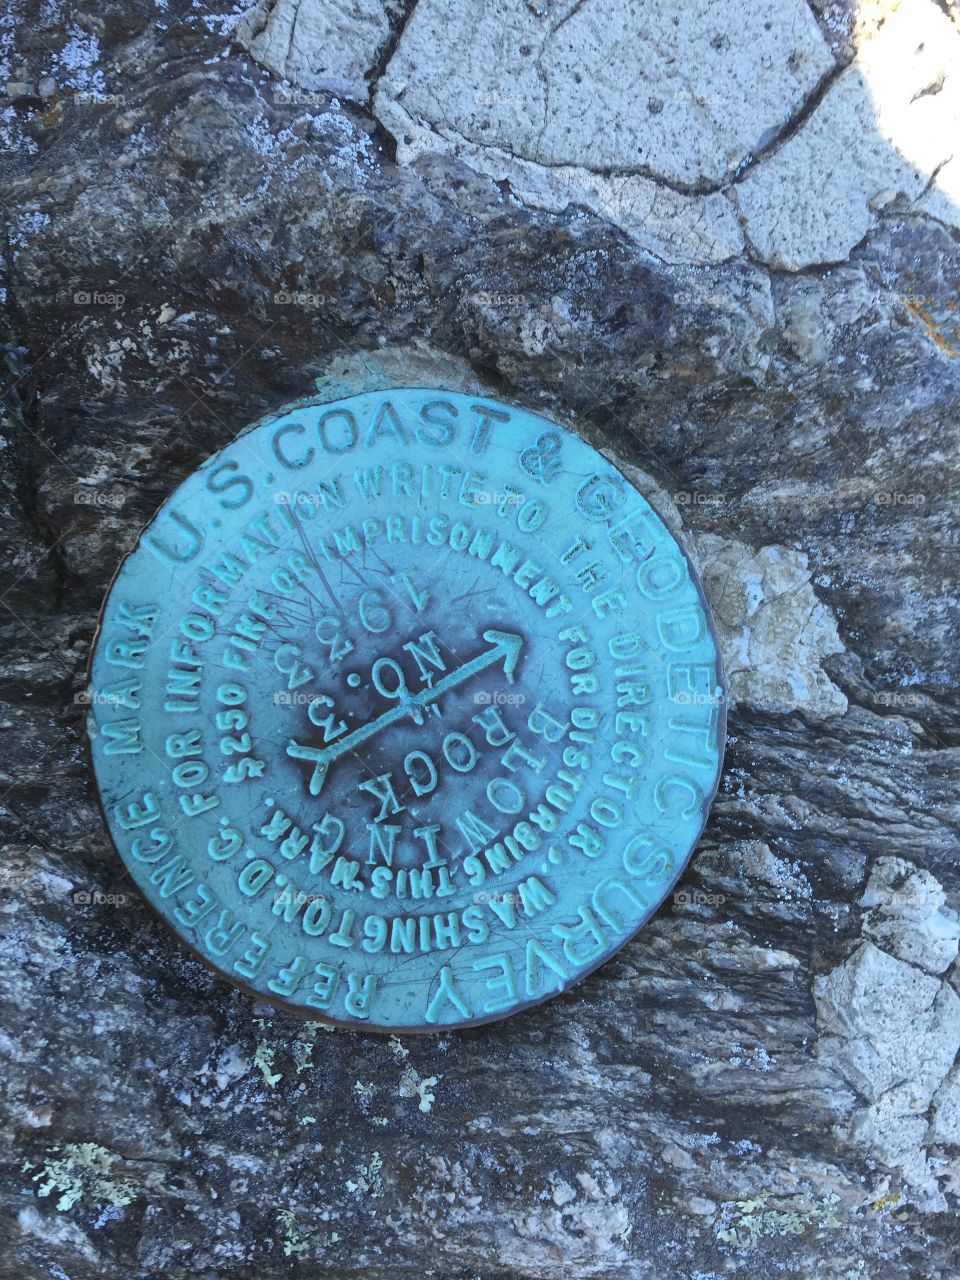 Blowing Rock monument marker 